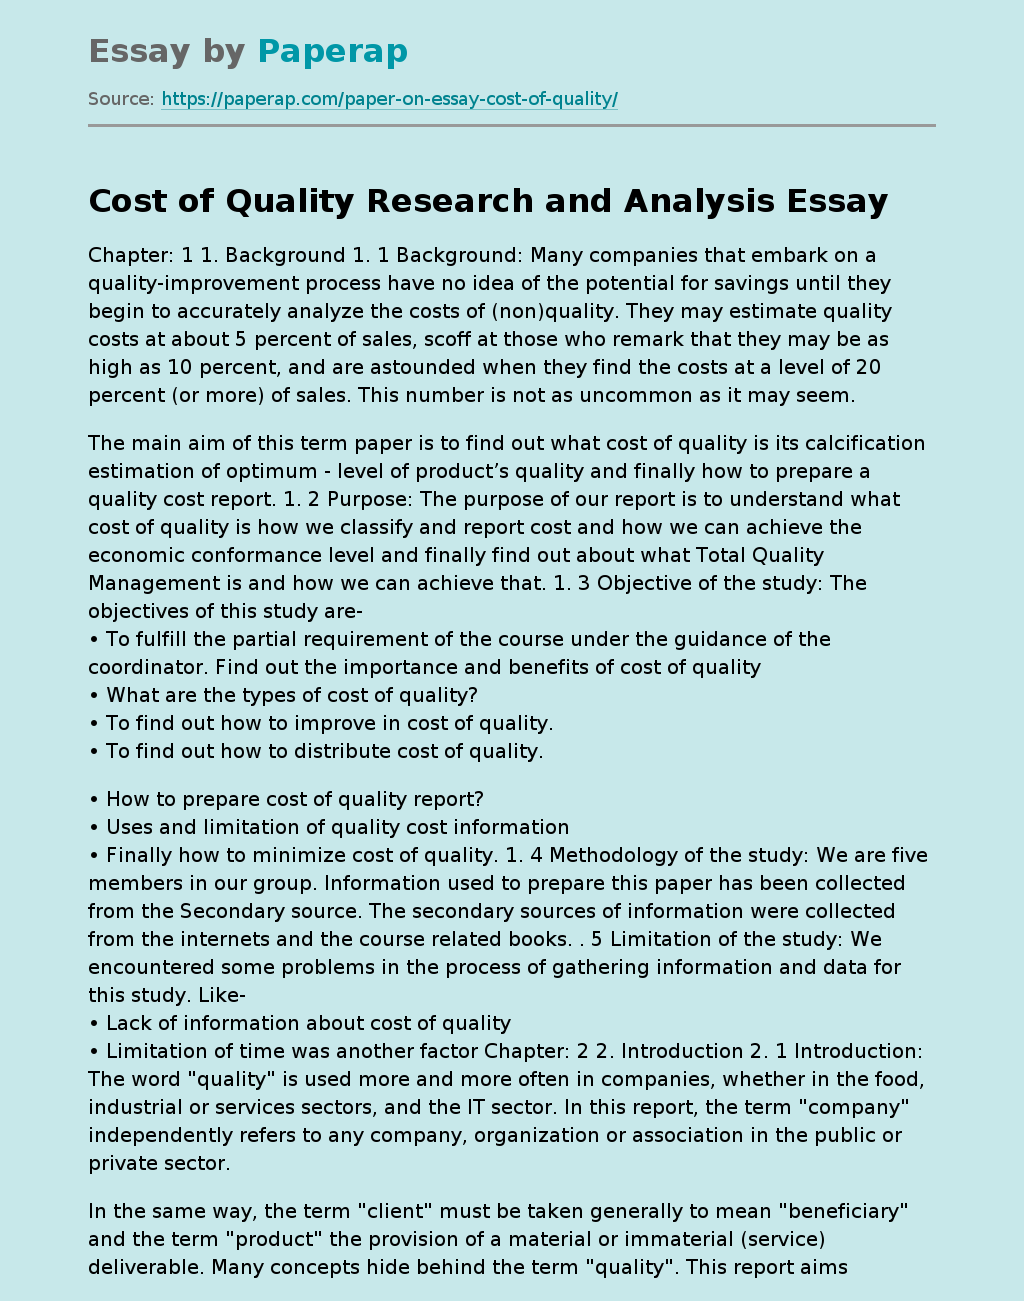 Cost of Quality Research and Analysis